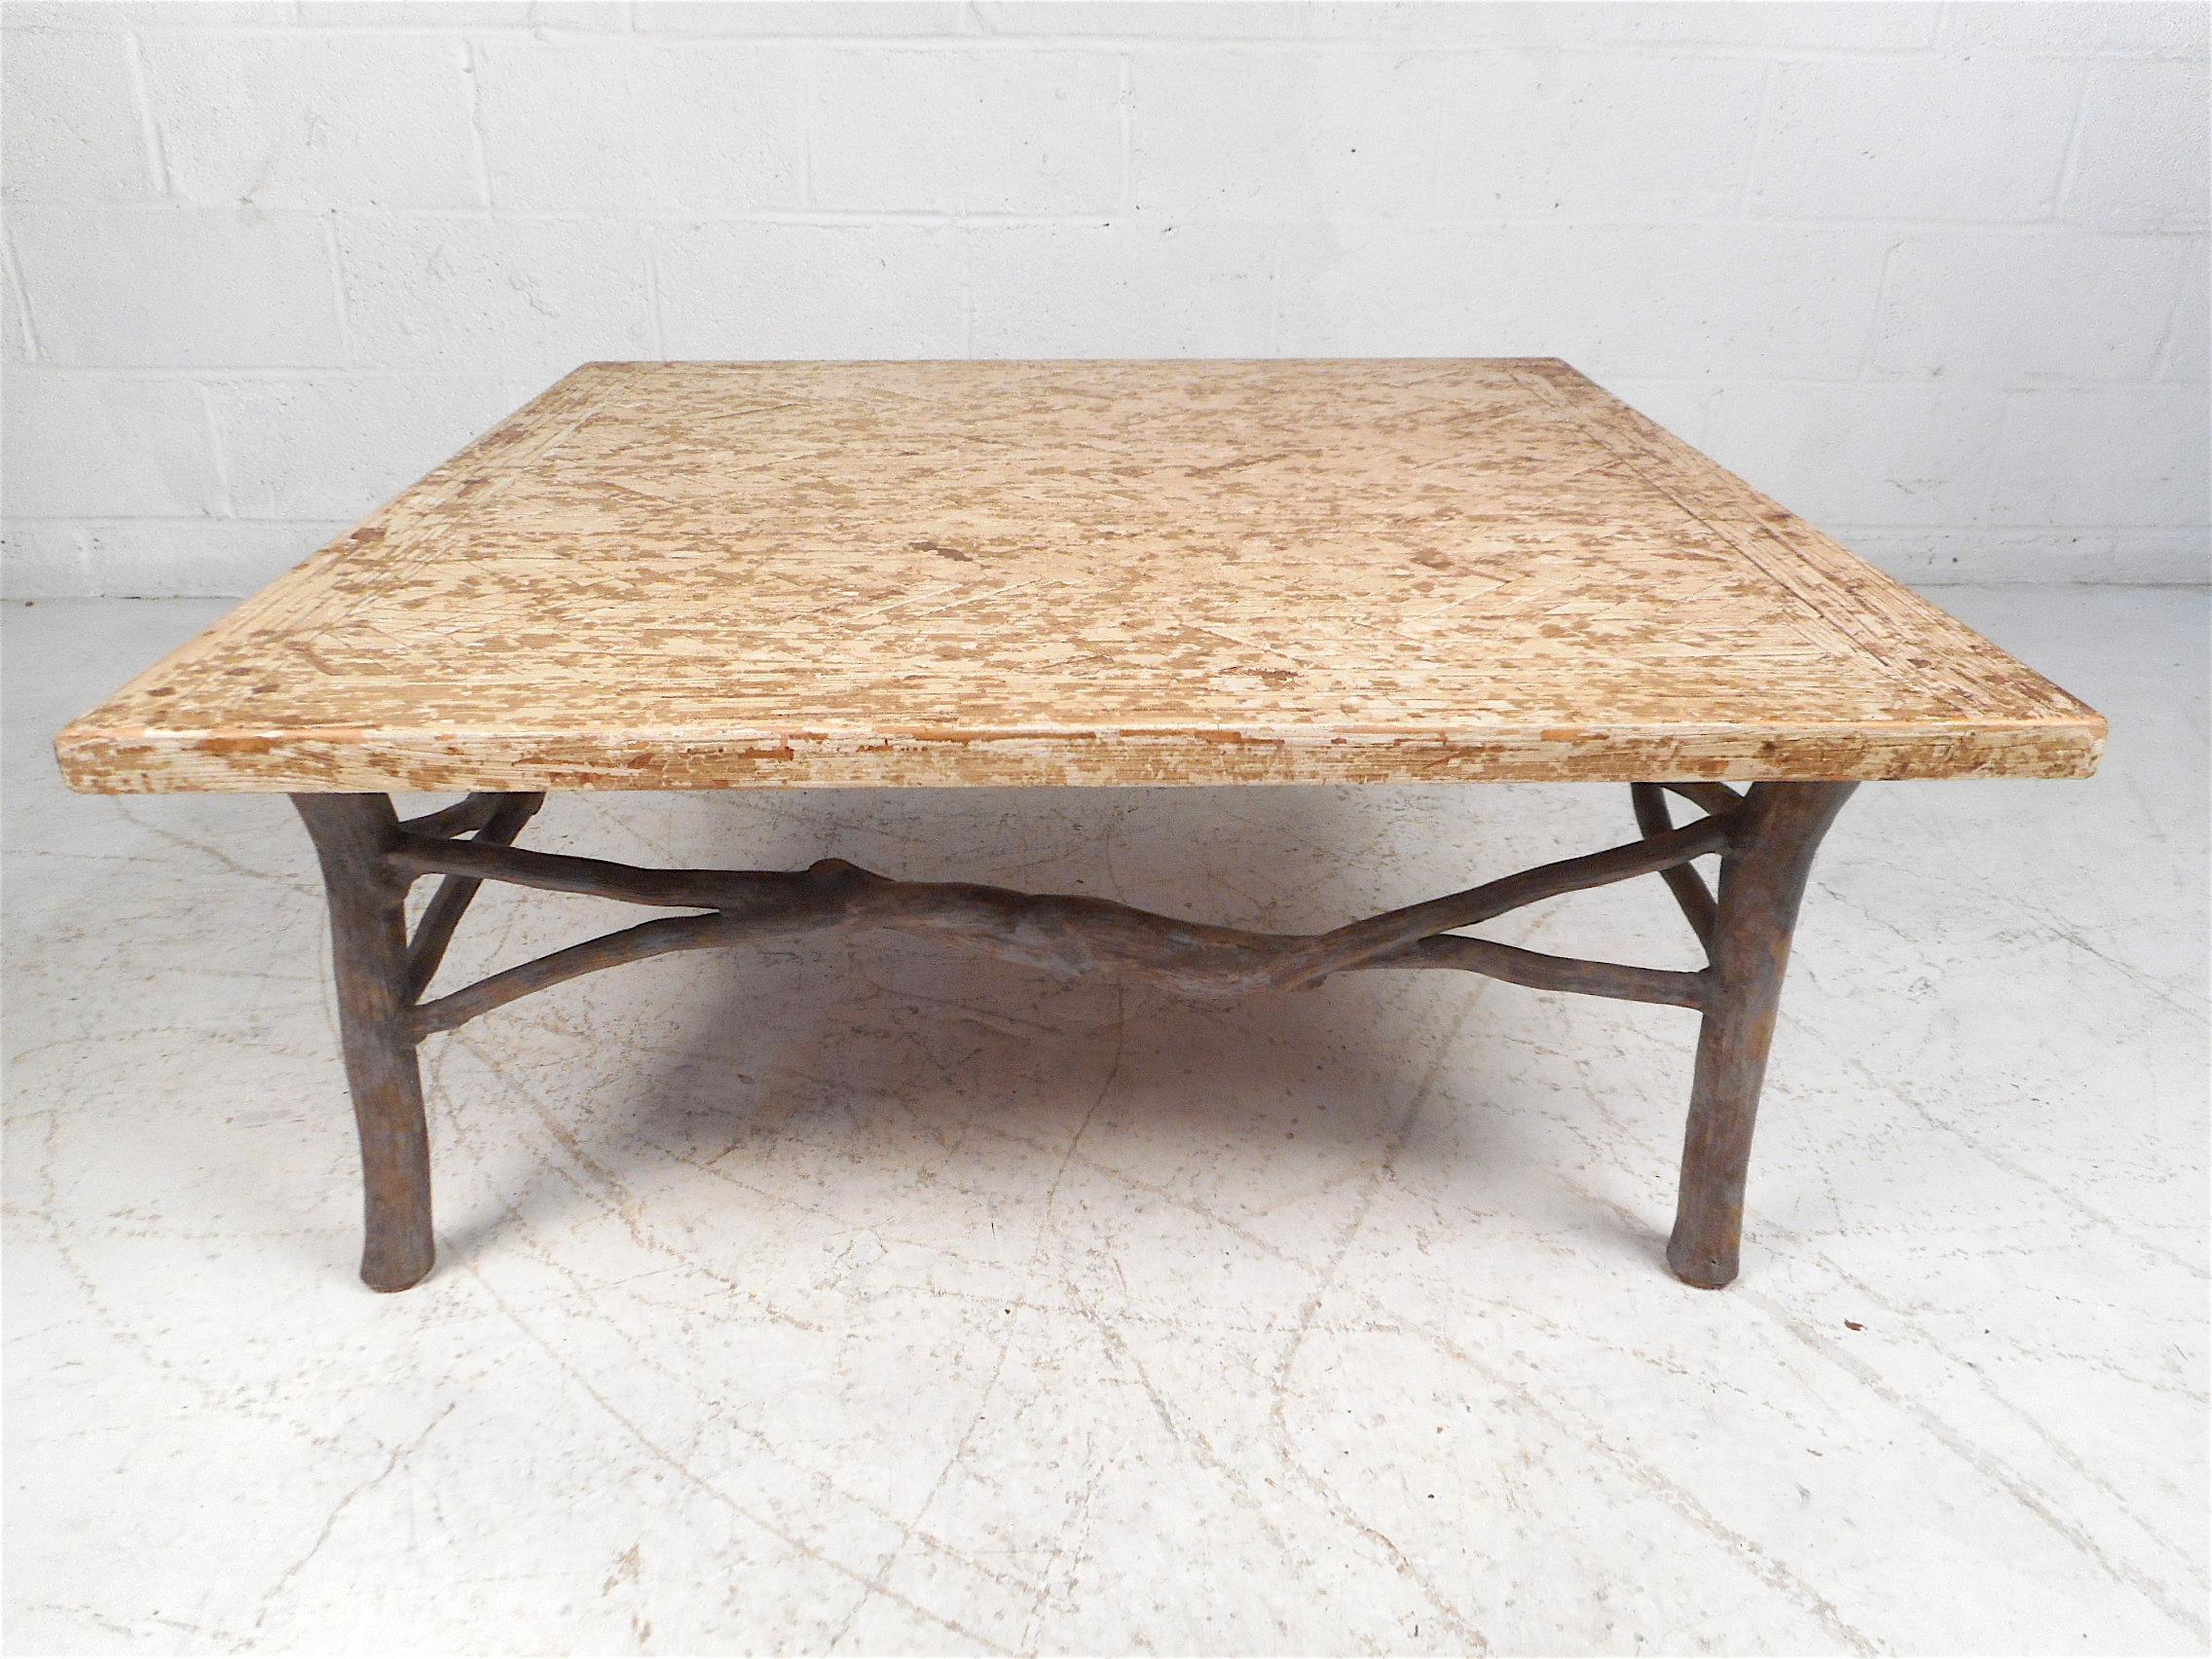 Vintage coffee table with a large, square tabletop, and an interesting metal base. The tabletop has an unusual textured finish applied. This table is sure to make a great addition to any modern interior. Please confirm item location with dealer (NJ